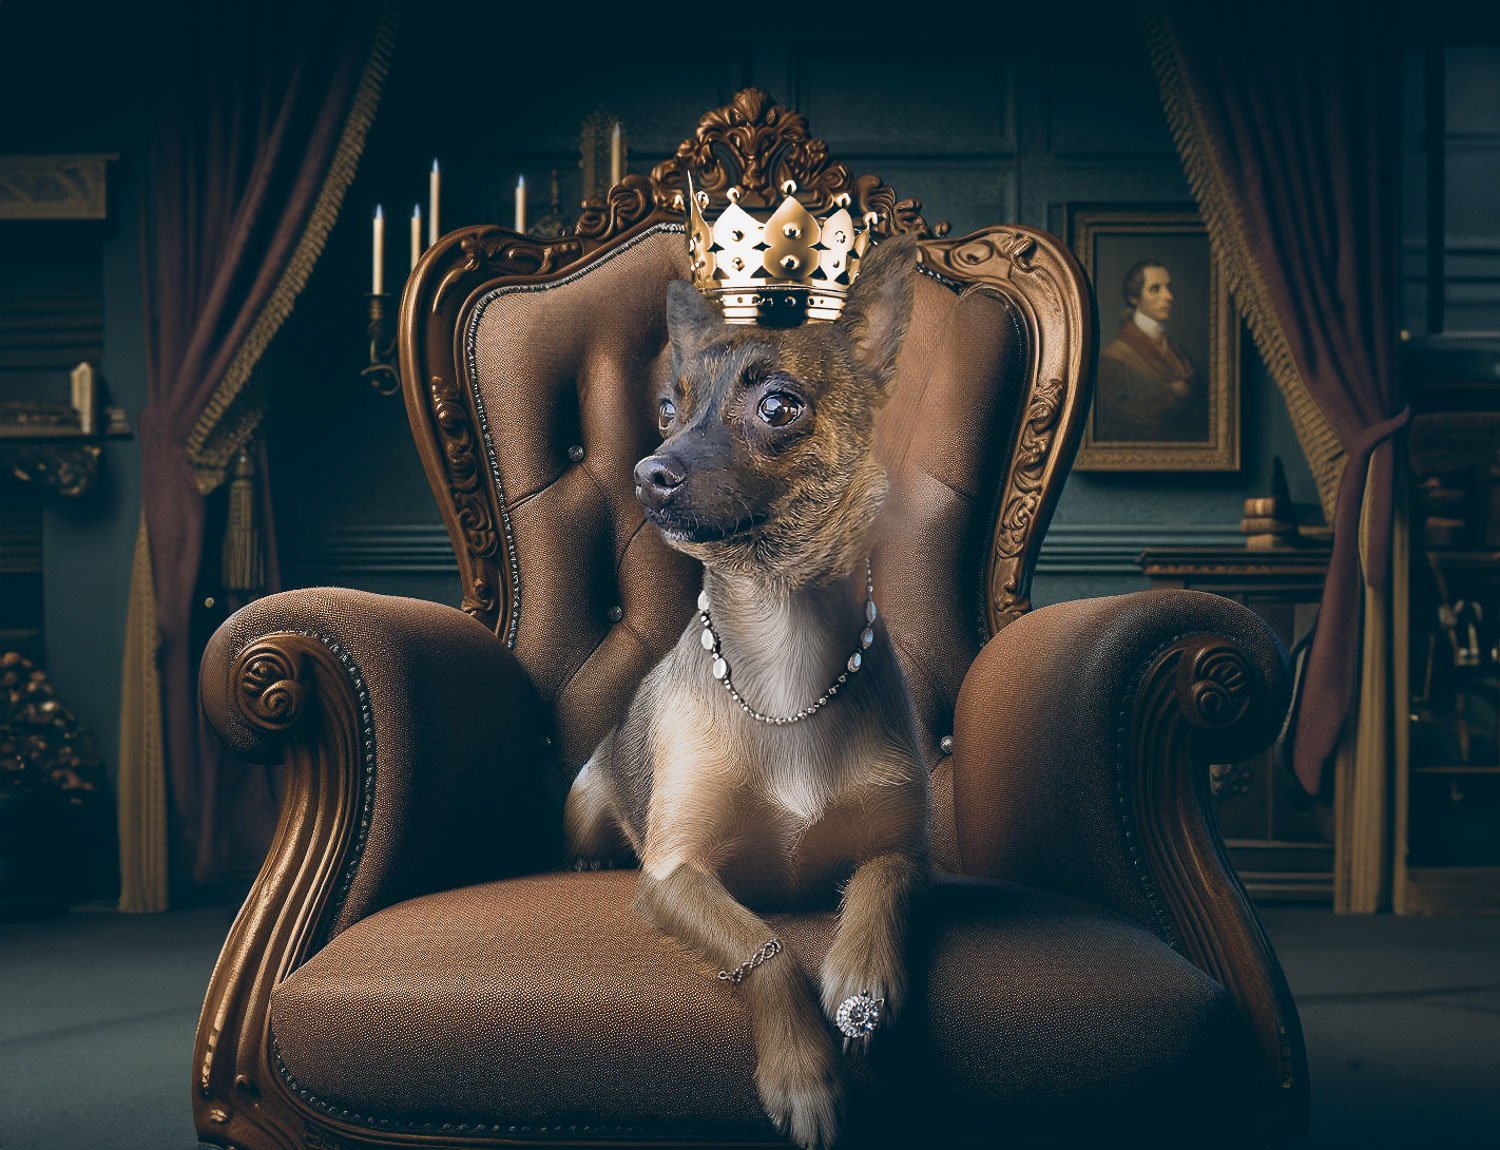 A brown Chihuahua dog lying on a chair wearing a golden crown a bracelet and a diamond ring